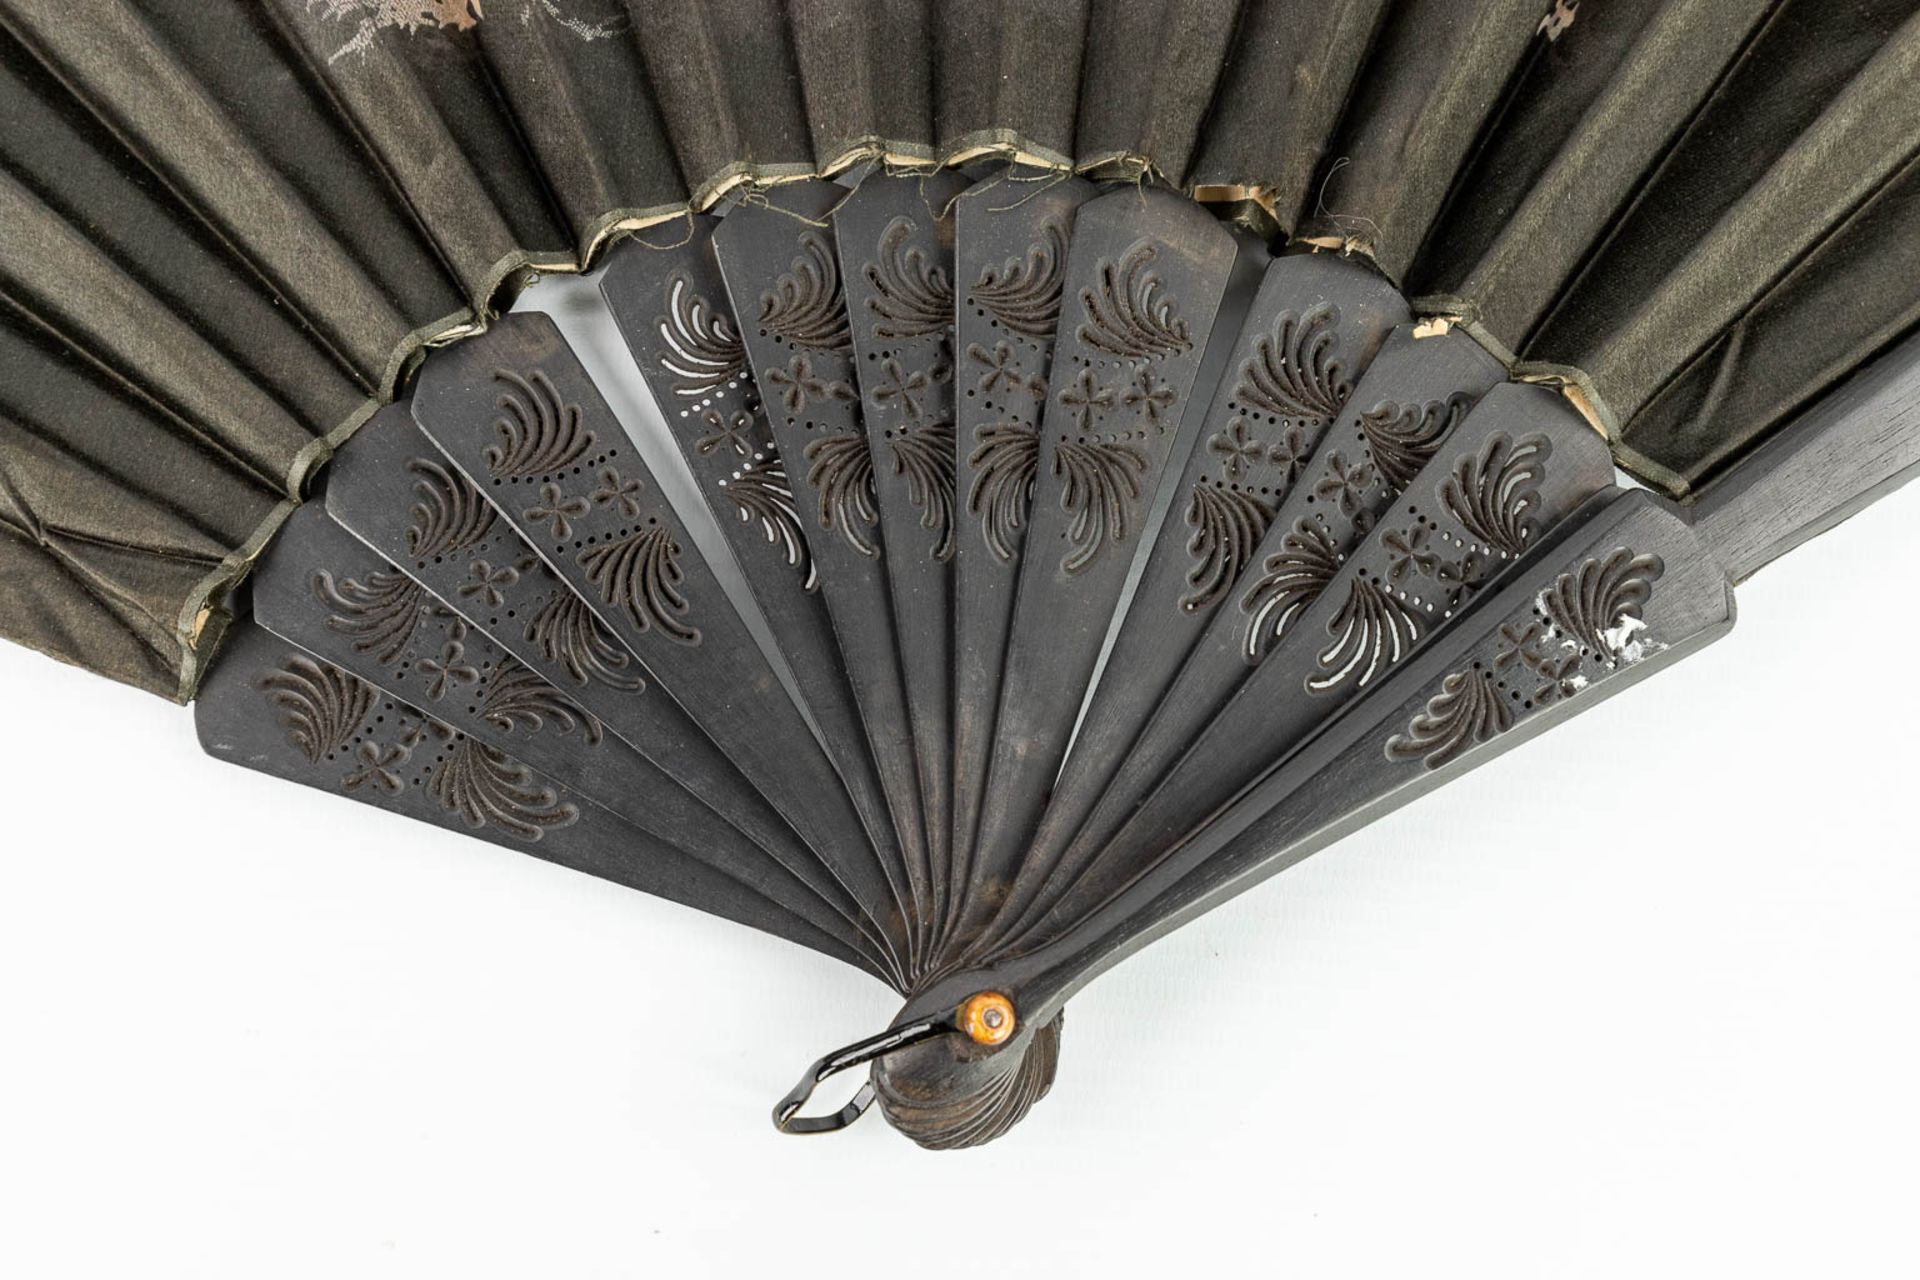 An antique hand-fan decorated with medieval scnes, made of silk. (H:35cm) - Image 9 of 9